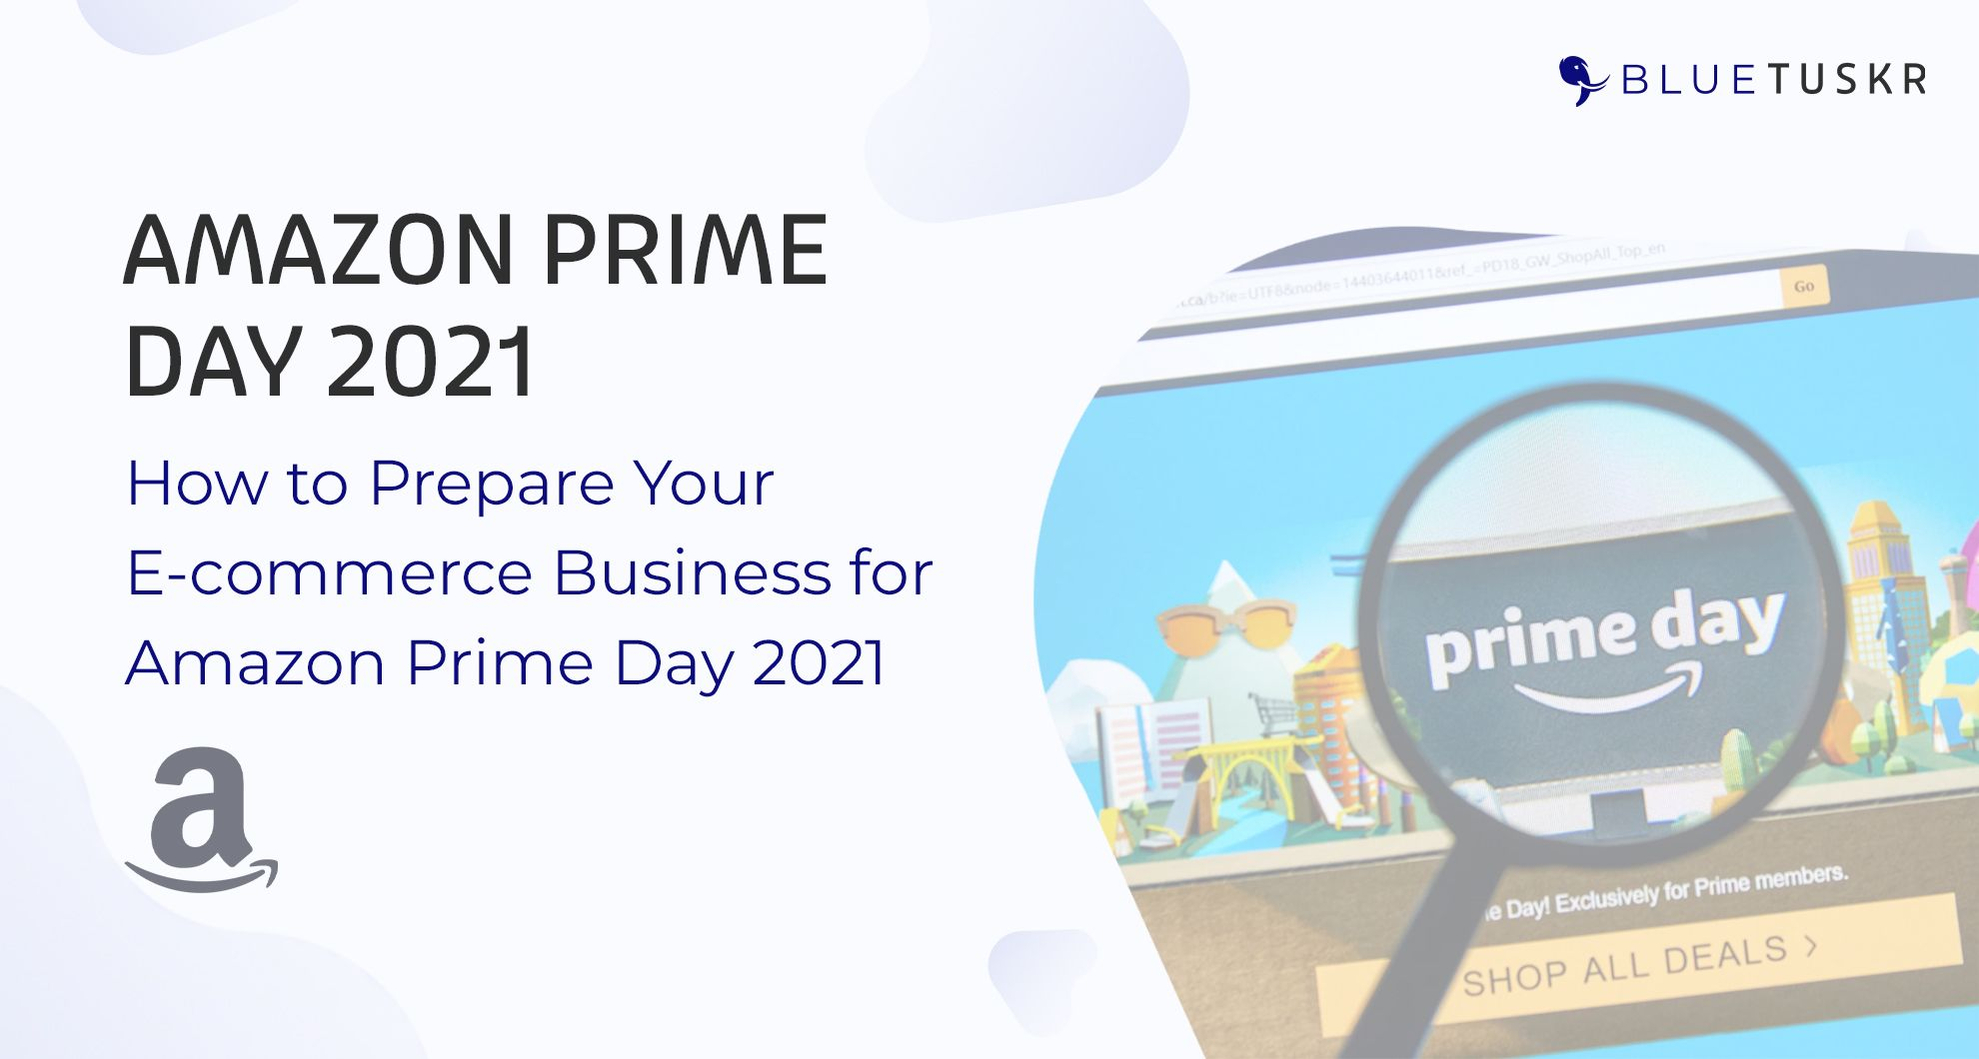 How to Prepare Your E-commerce Business for Amazon Prime Day 2021